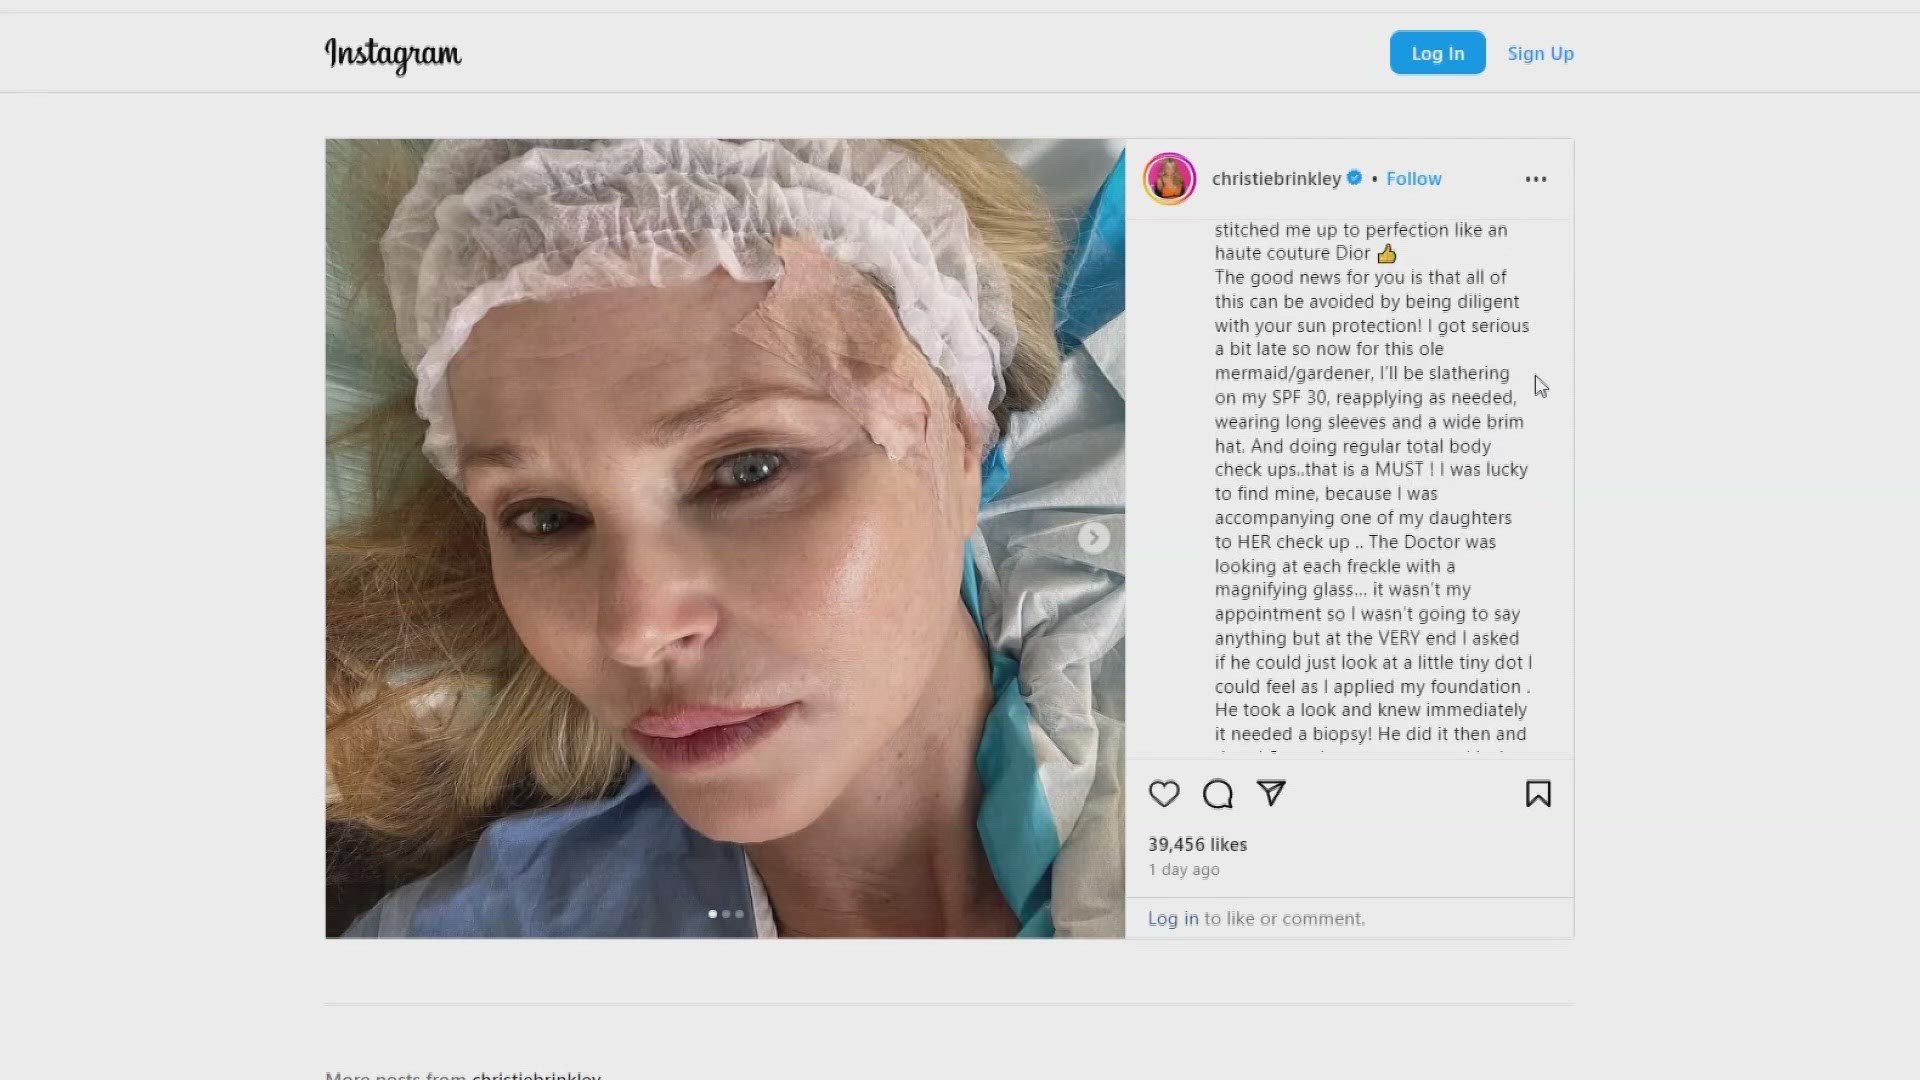 Christie Brinkley's skin cancer diagnosis highlighted the importance of awareness and early protection.